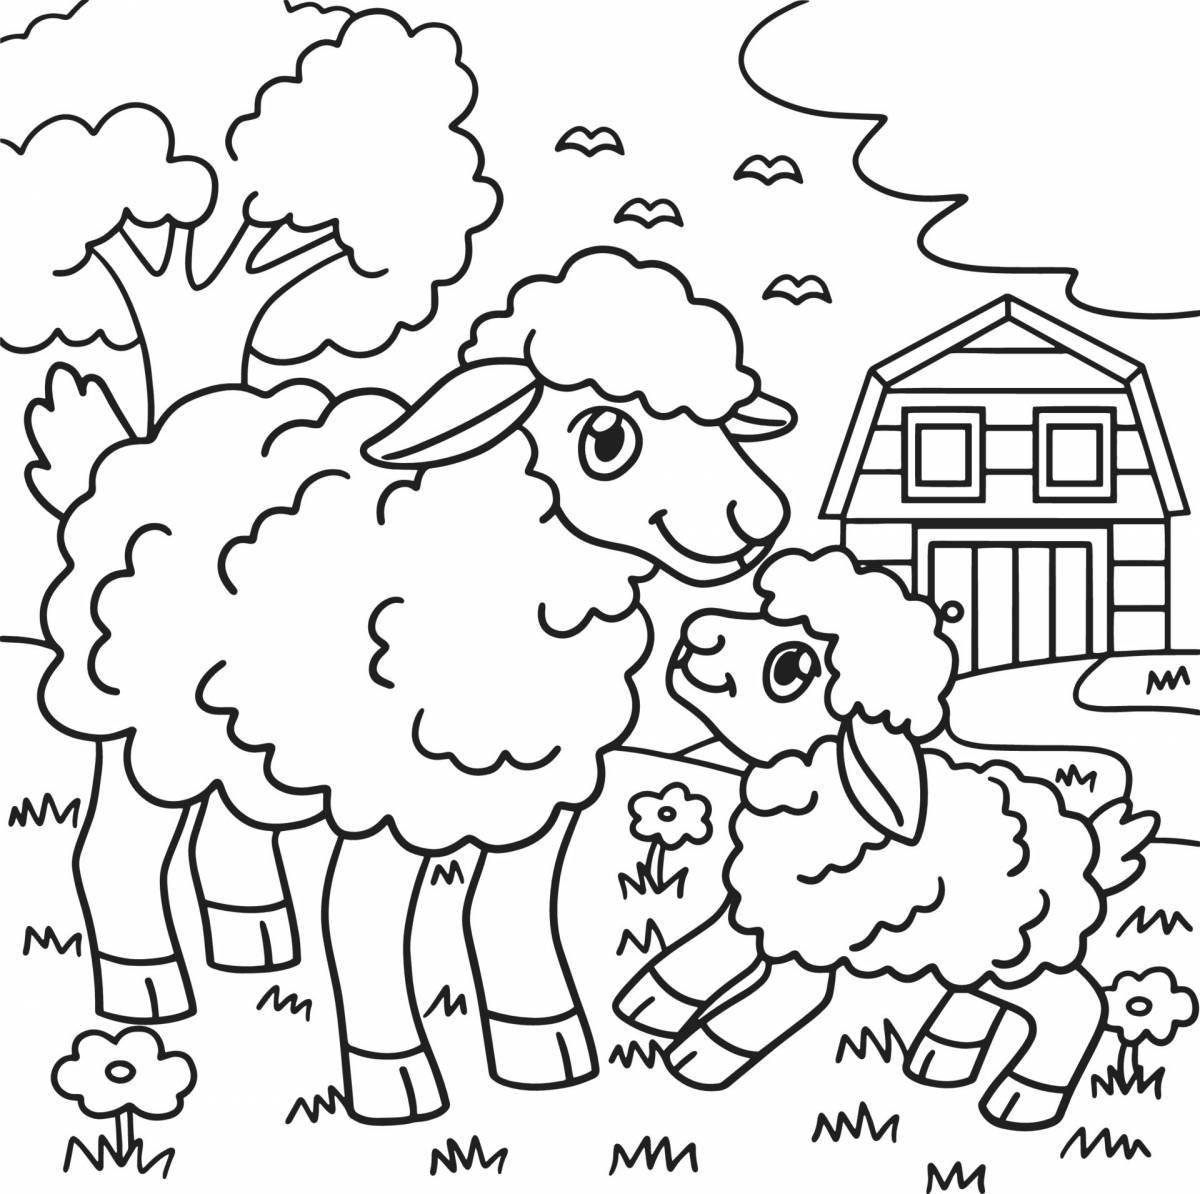 Coloring sheep for children 4-5 years old